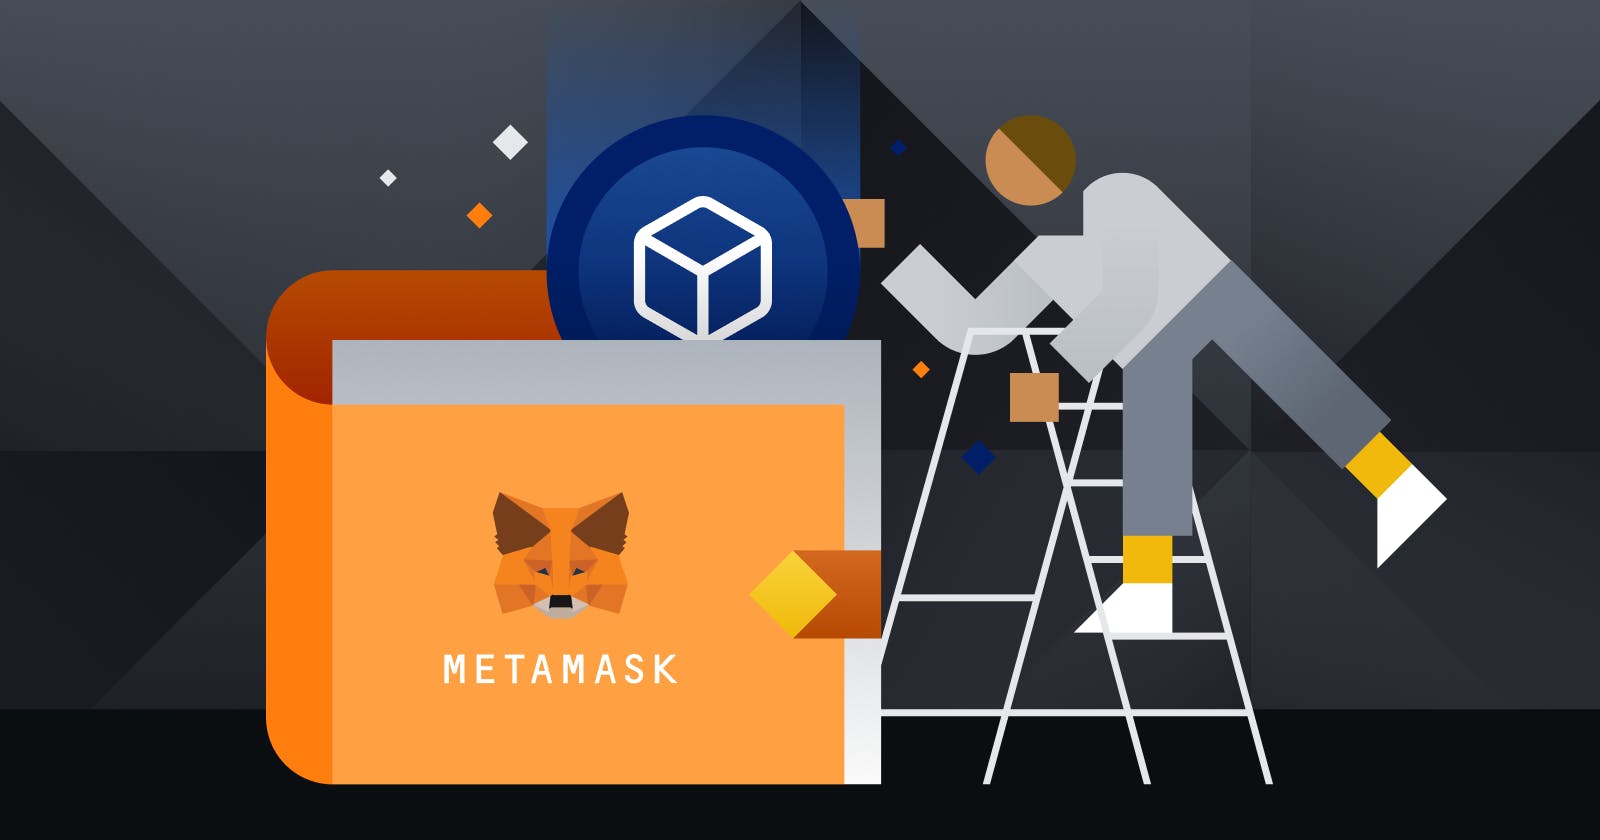 How to Add Fantom to MetaMask?